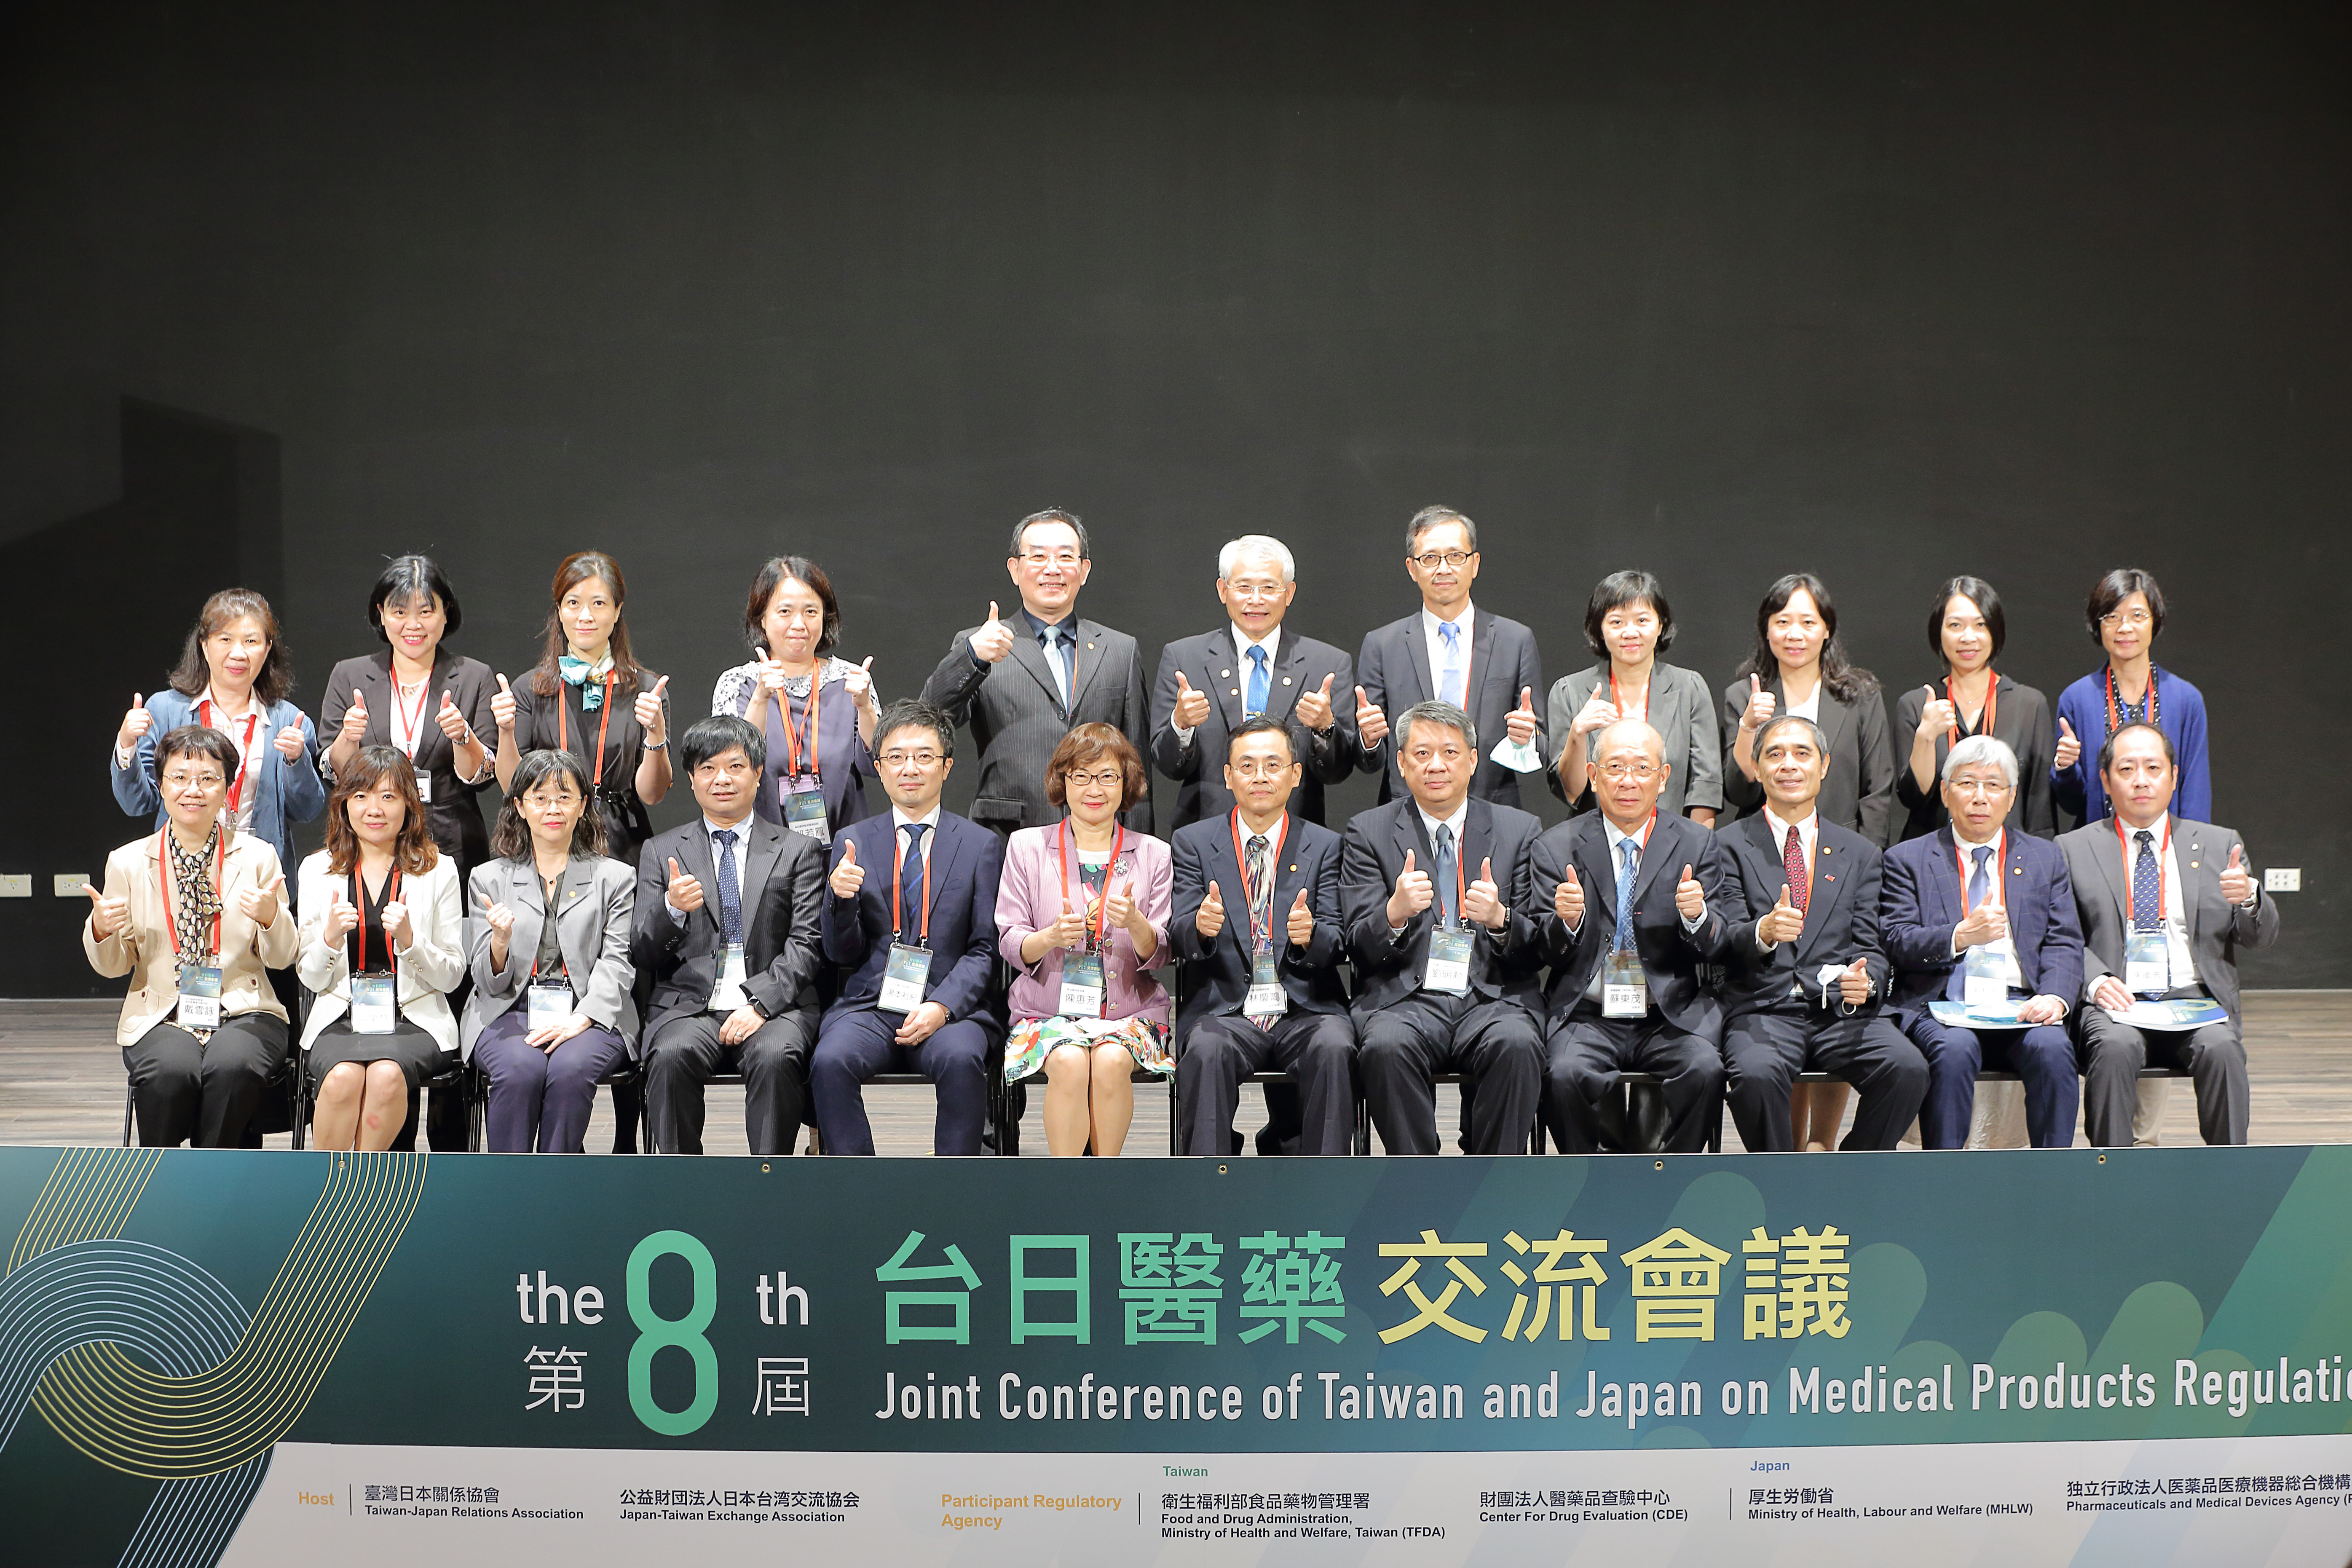 8th Joint Conference of Taiwan and Japan on Medical Products Regulation